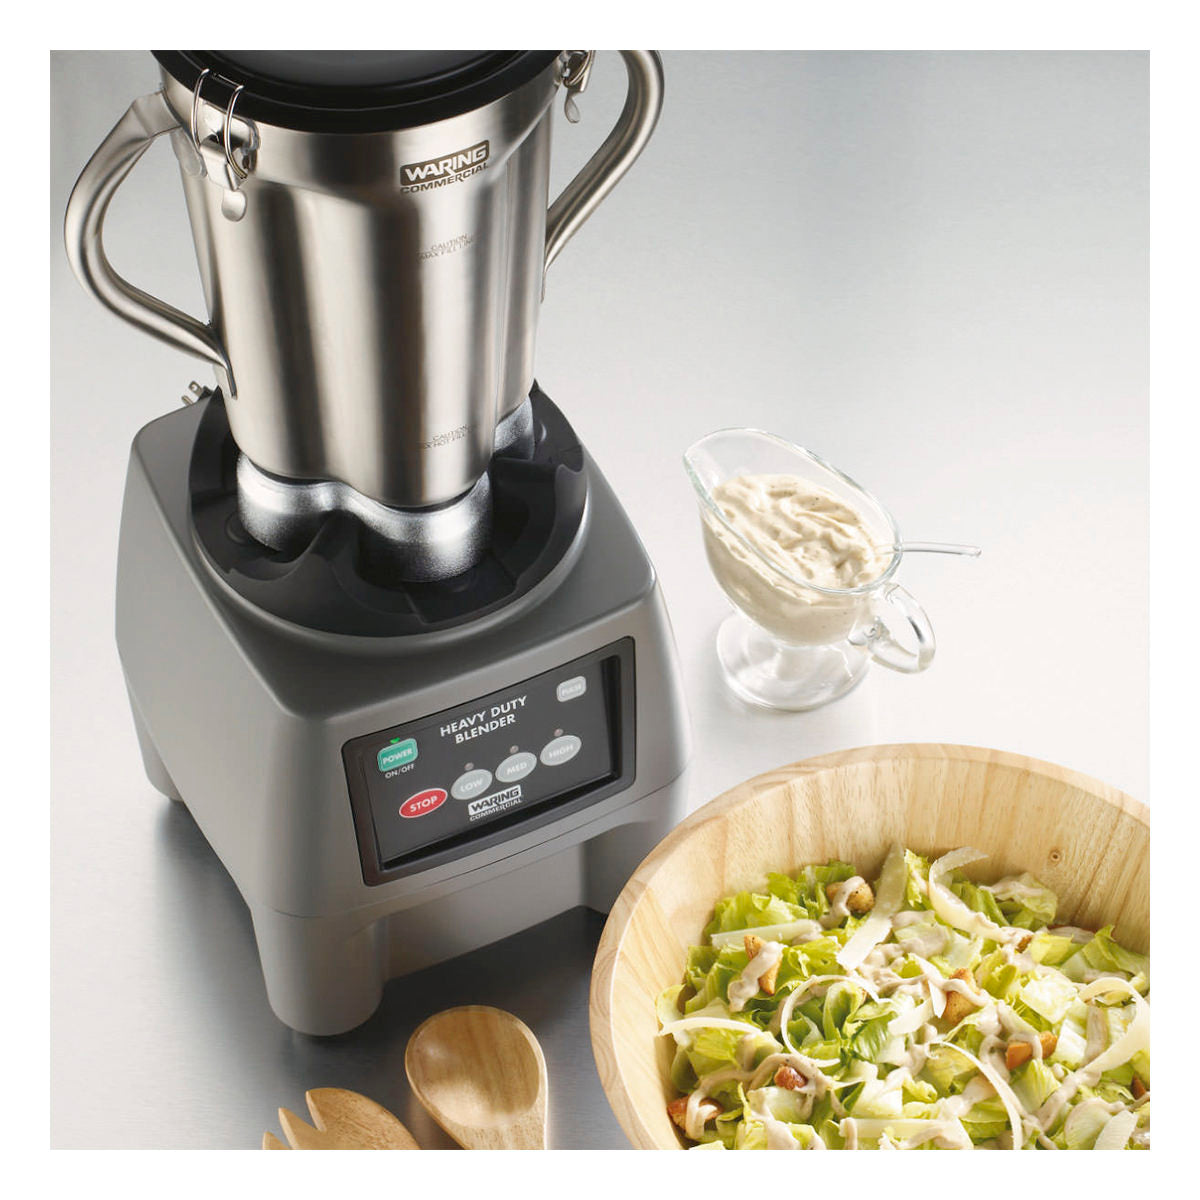 CB15 Heavy-Duty One Gallon Food Blender by Waring Commercial